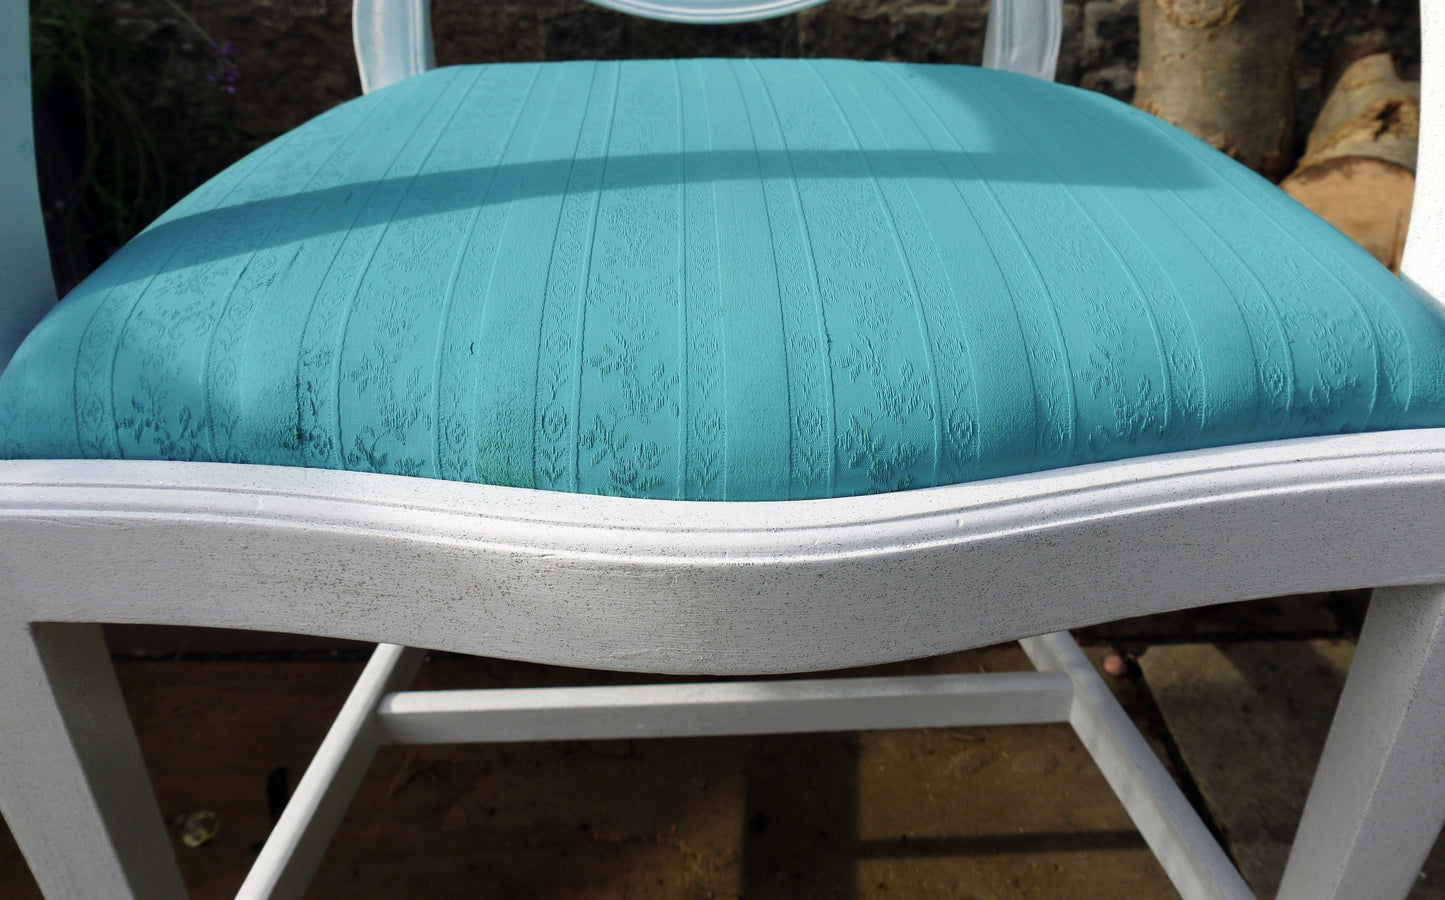 Dressing table chair in Teal and ANNABELL DUKE giltter glaze.